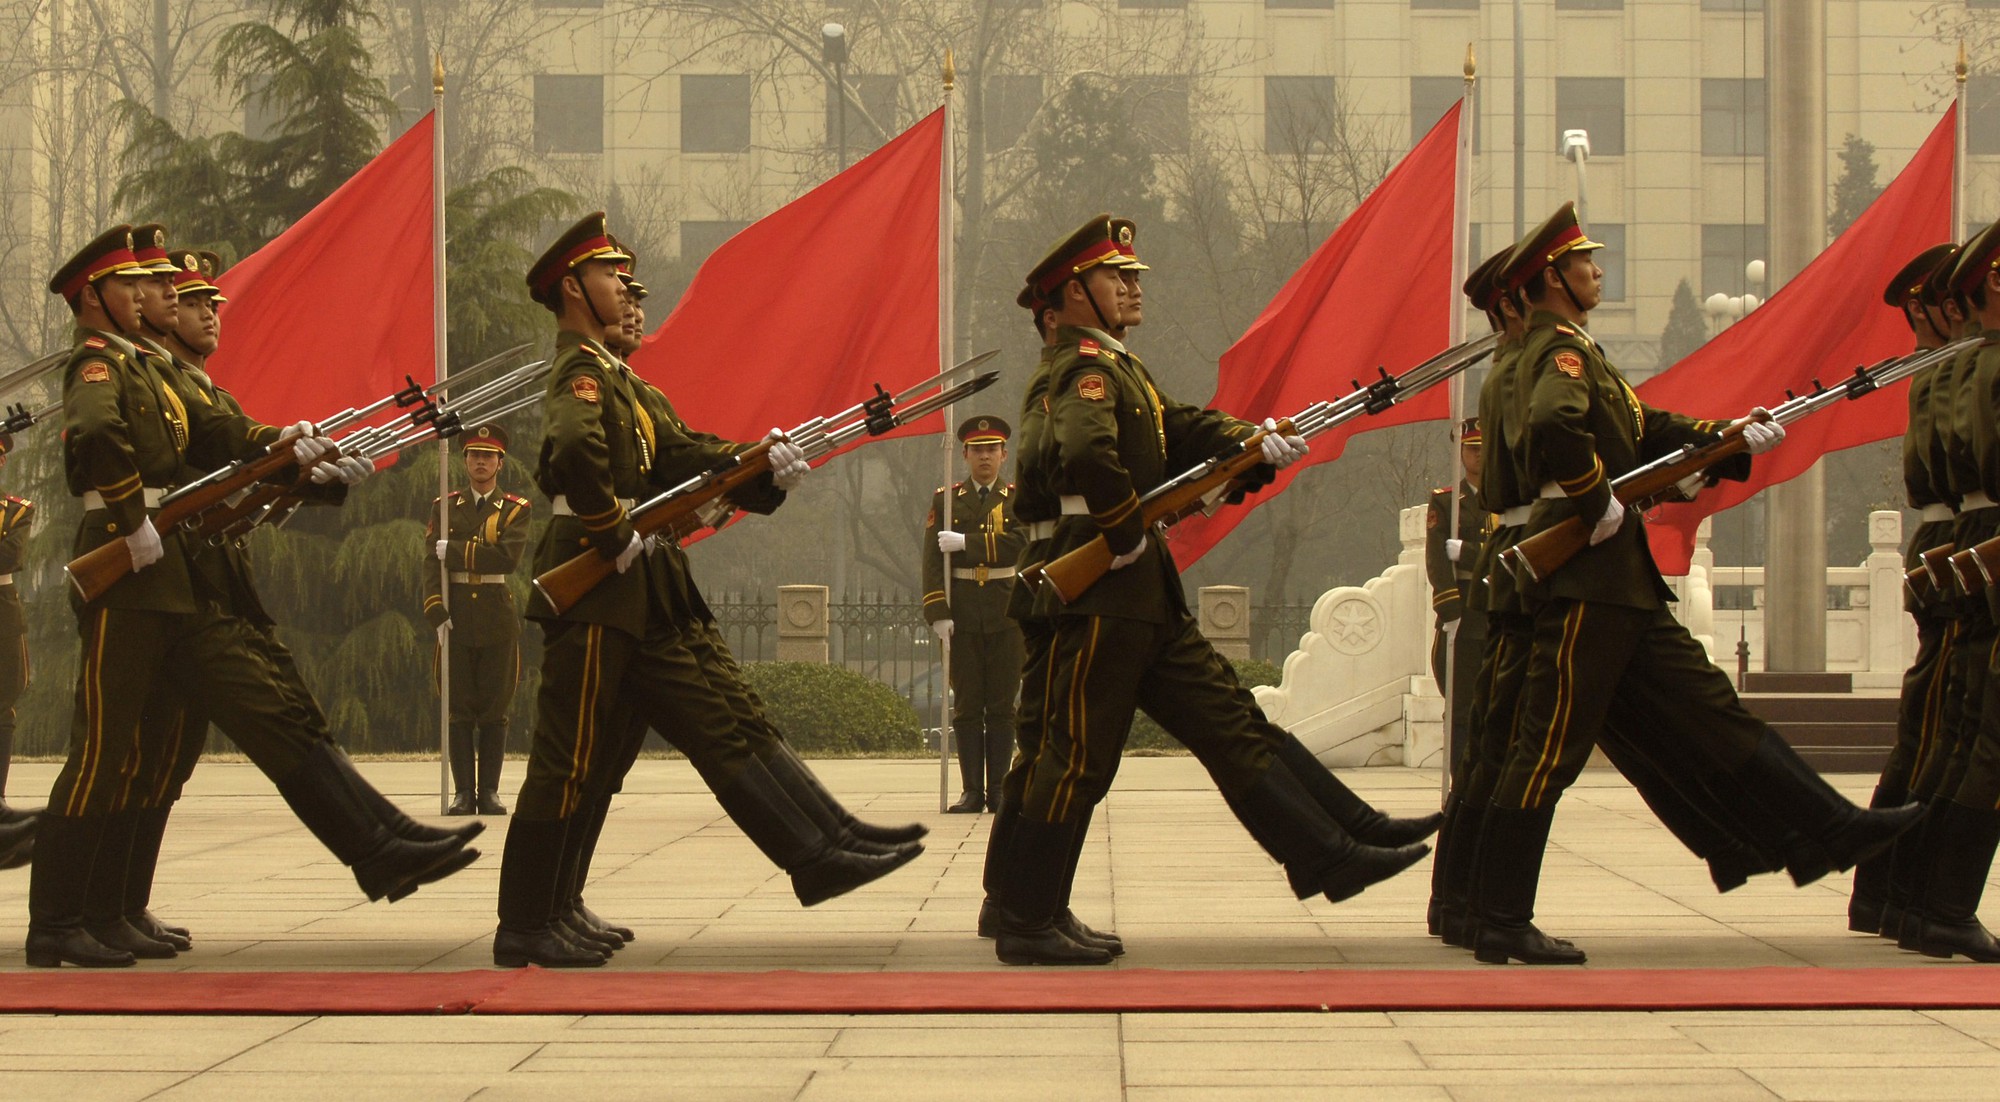 Chinese_honor_guard_in_column_070322-F-0193C-014